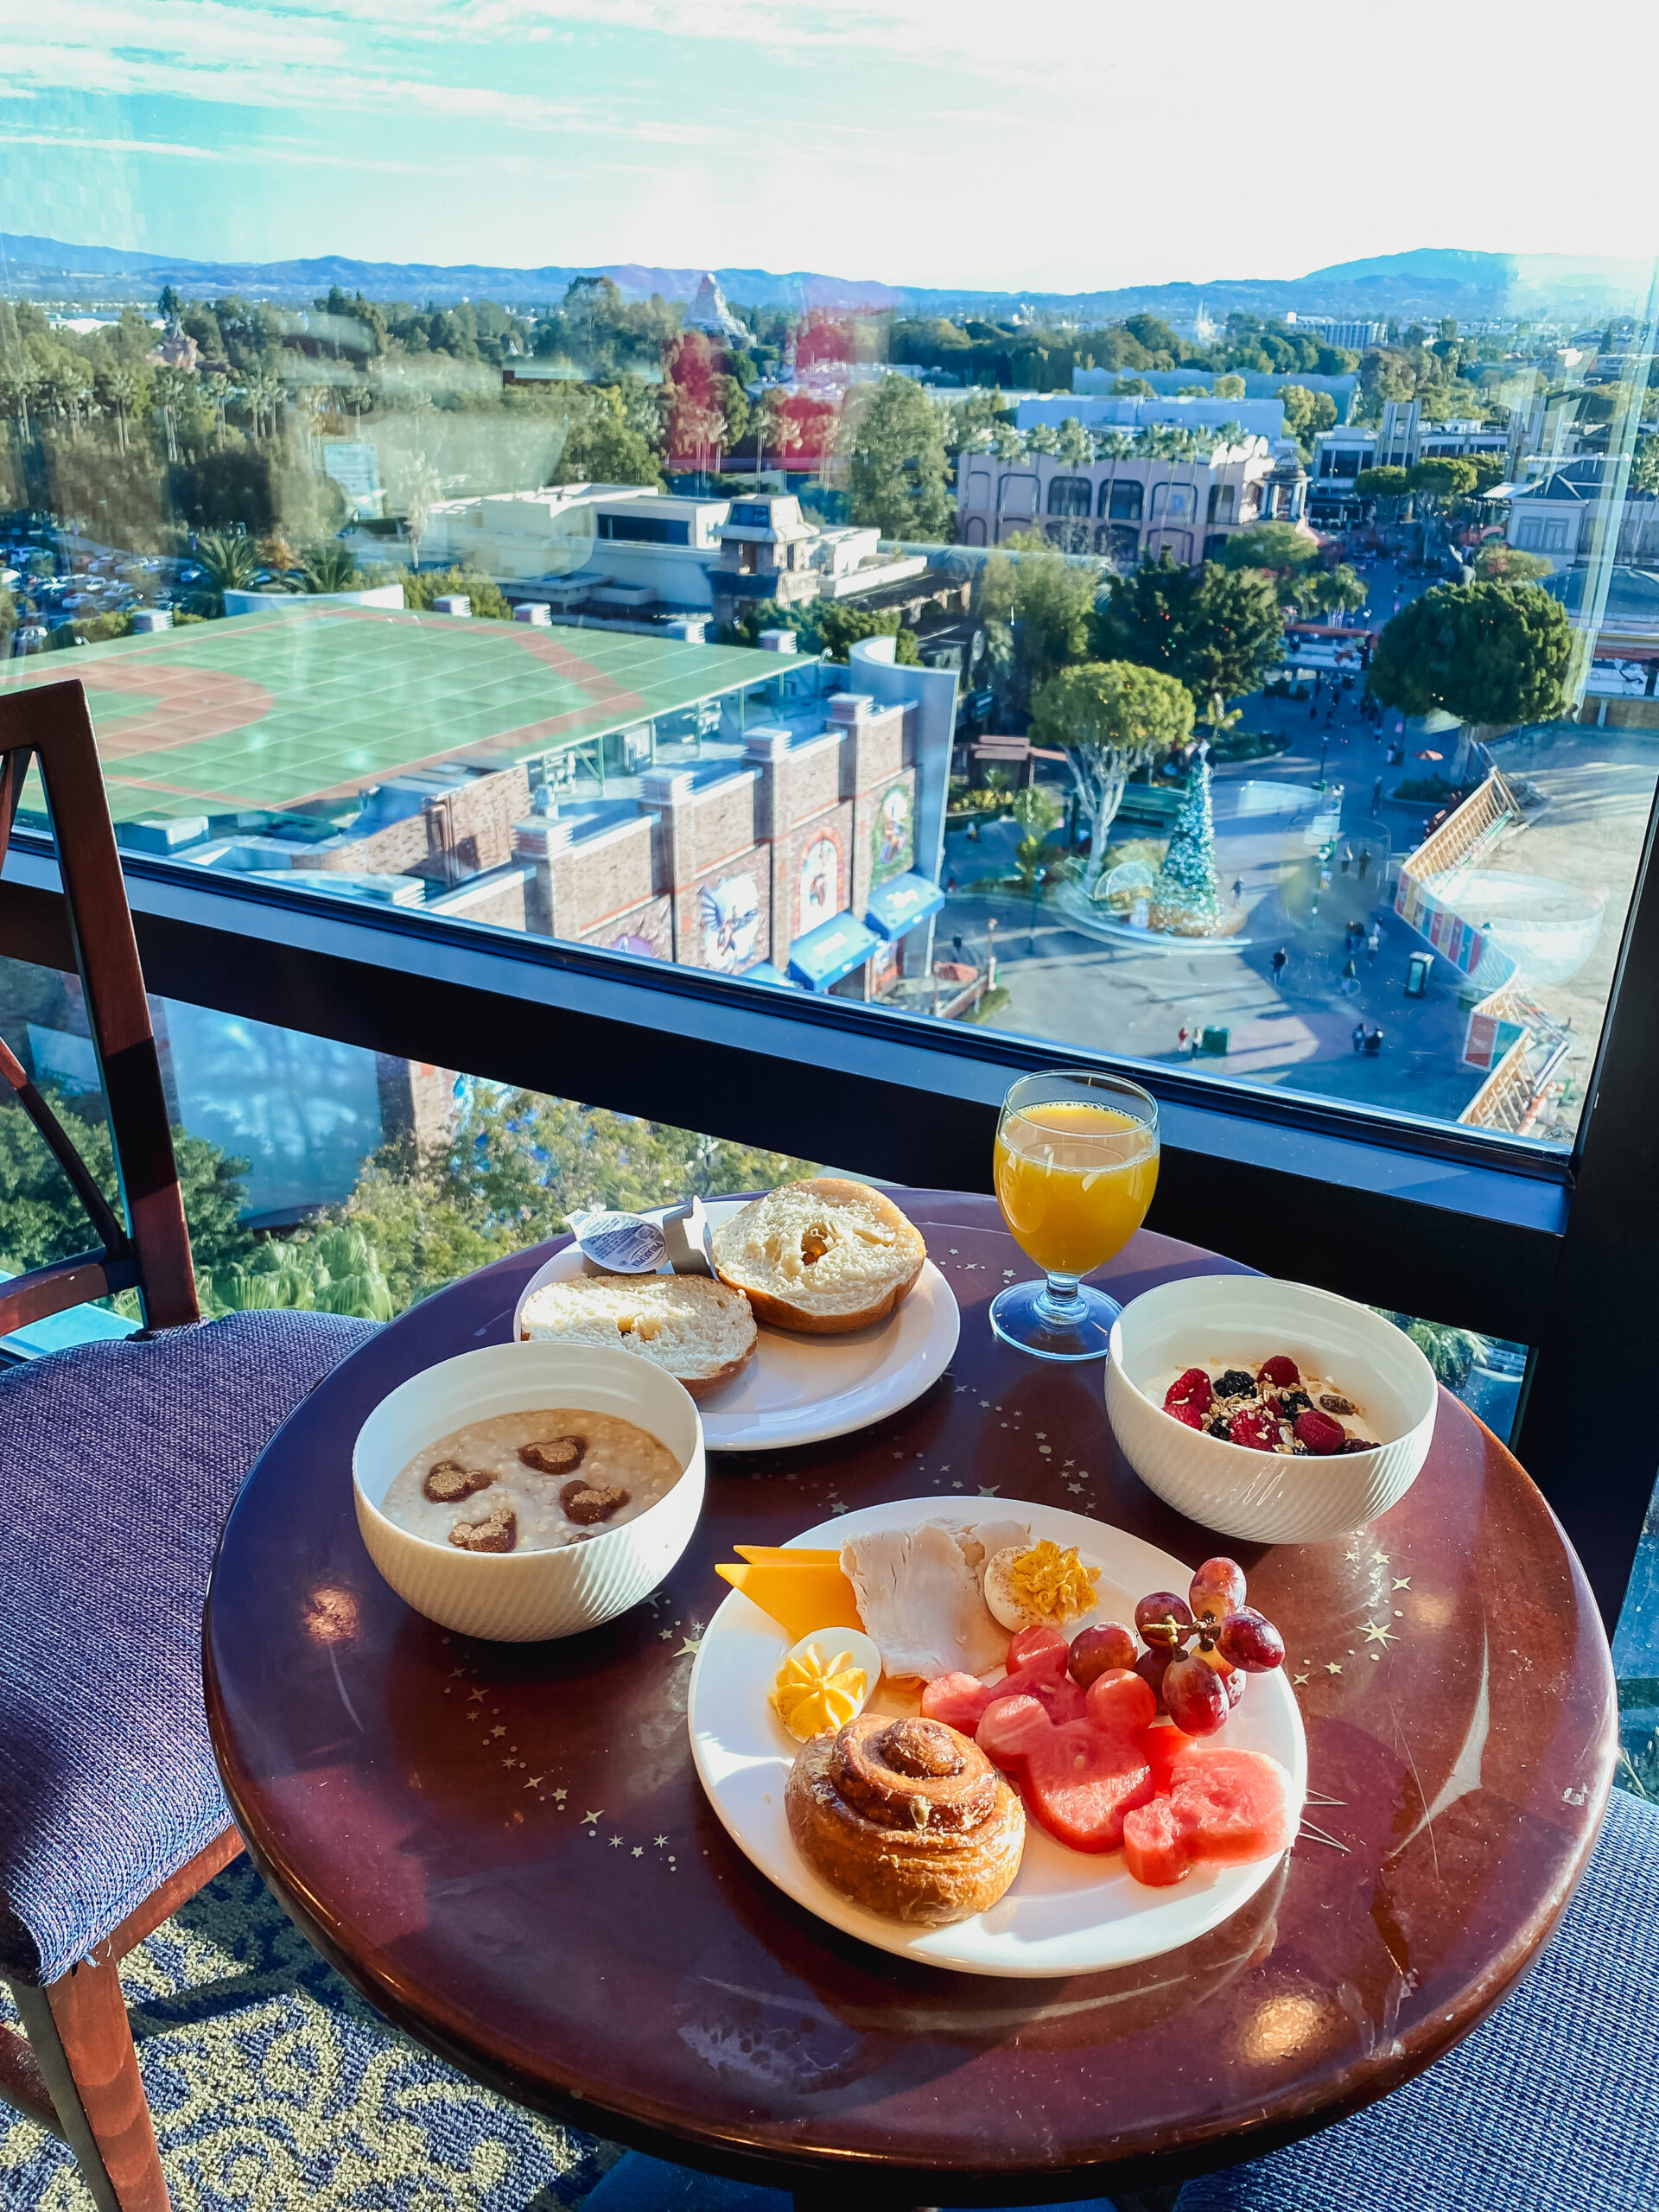 Club level views from the E-ticket Lounge at the Disneyland Hotel.